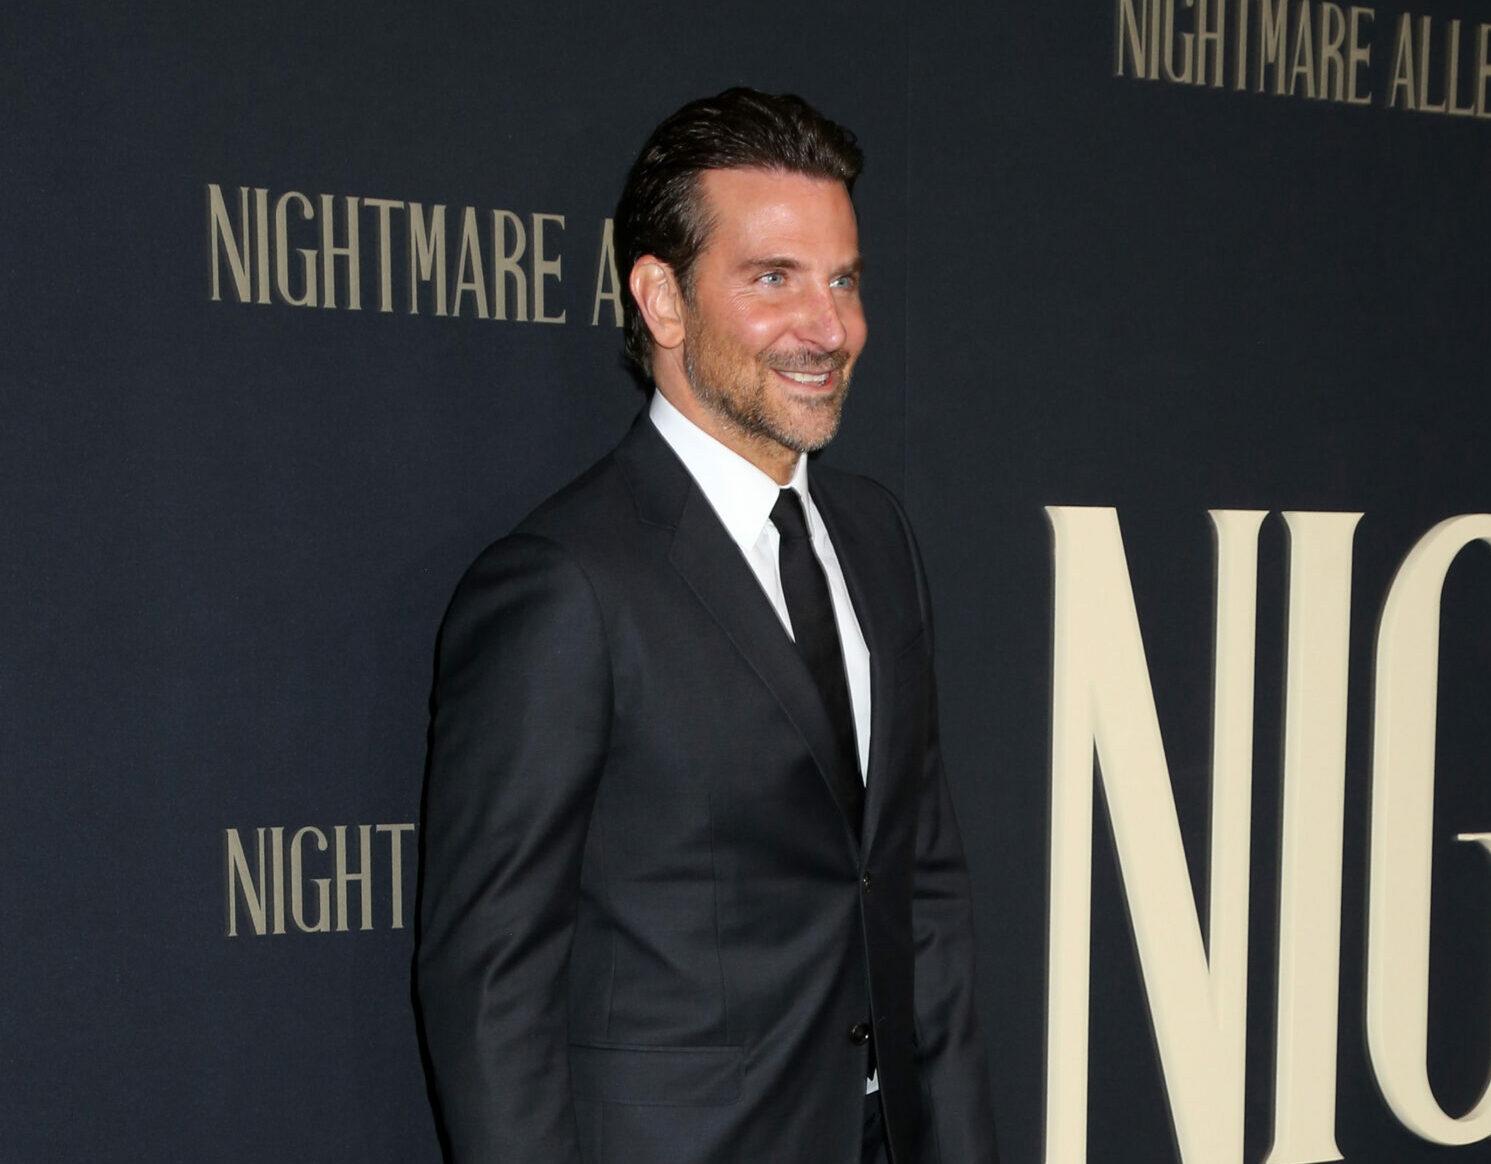 'Nightmare Alley' World Premiere held at Alice Tully Hall on December 1, 2021 in New York City. 01 Dec 2021 Pictured: Bradley Cooper.